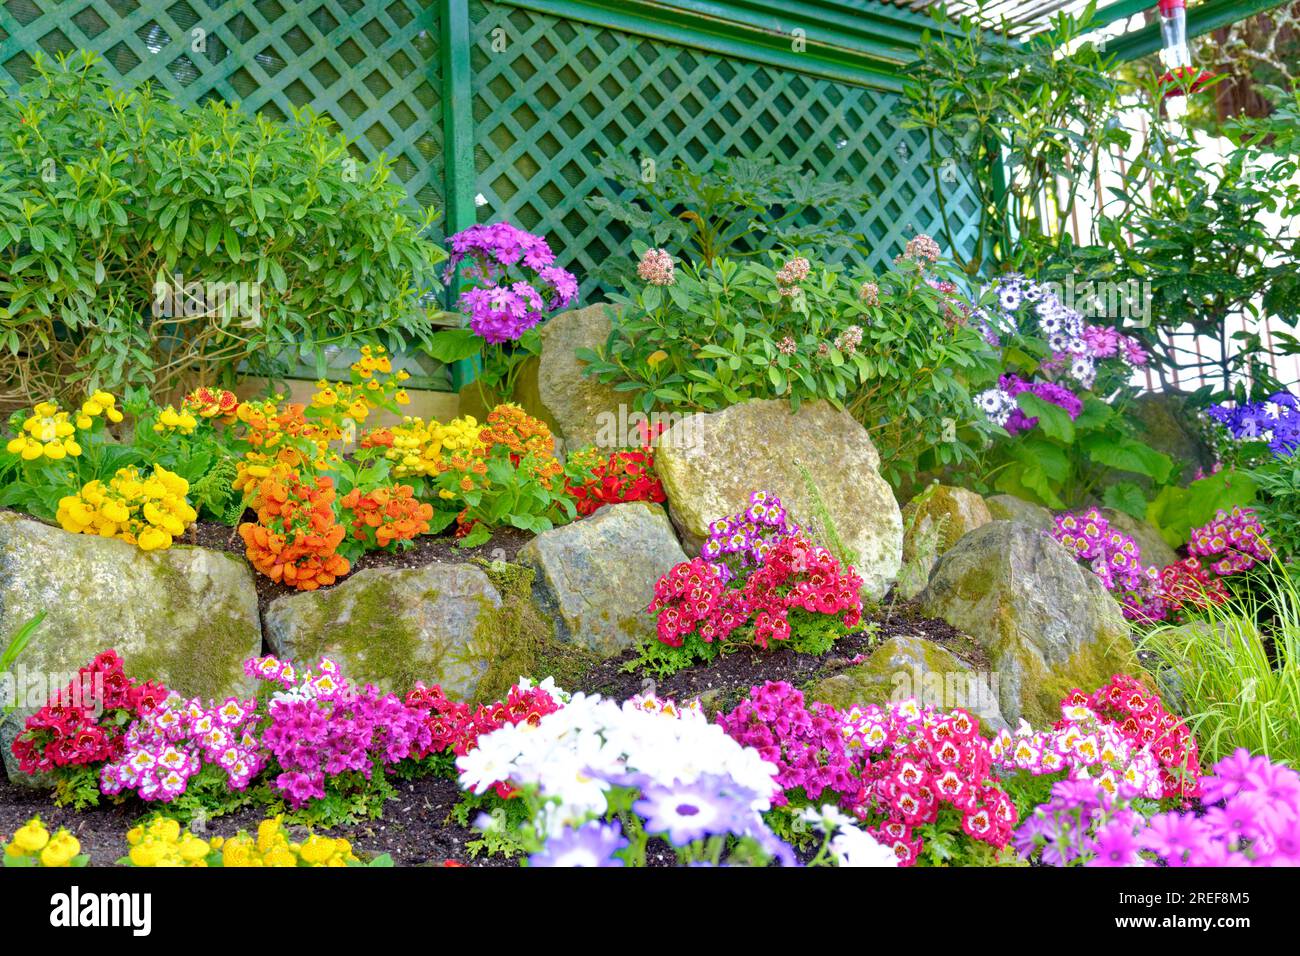 VICTORIA, BRITISH COLUMBIA - May 21, 2016: Butchart Gardens, near Victoria, receive over a million visitors each year, and have been designated a Nati Stock Photo